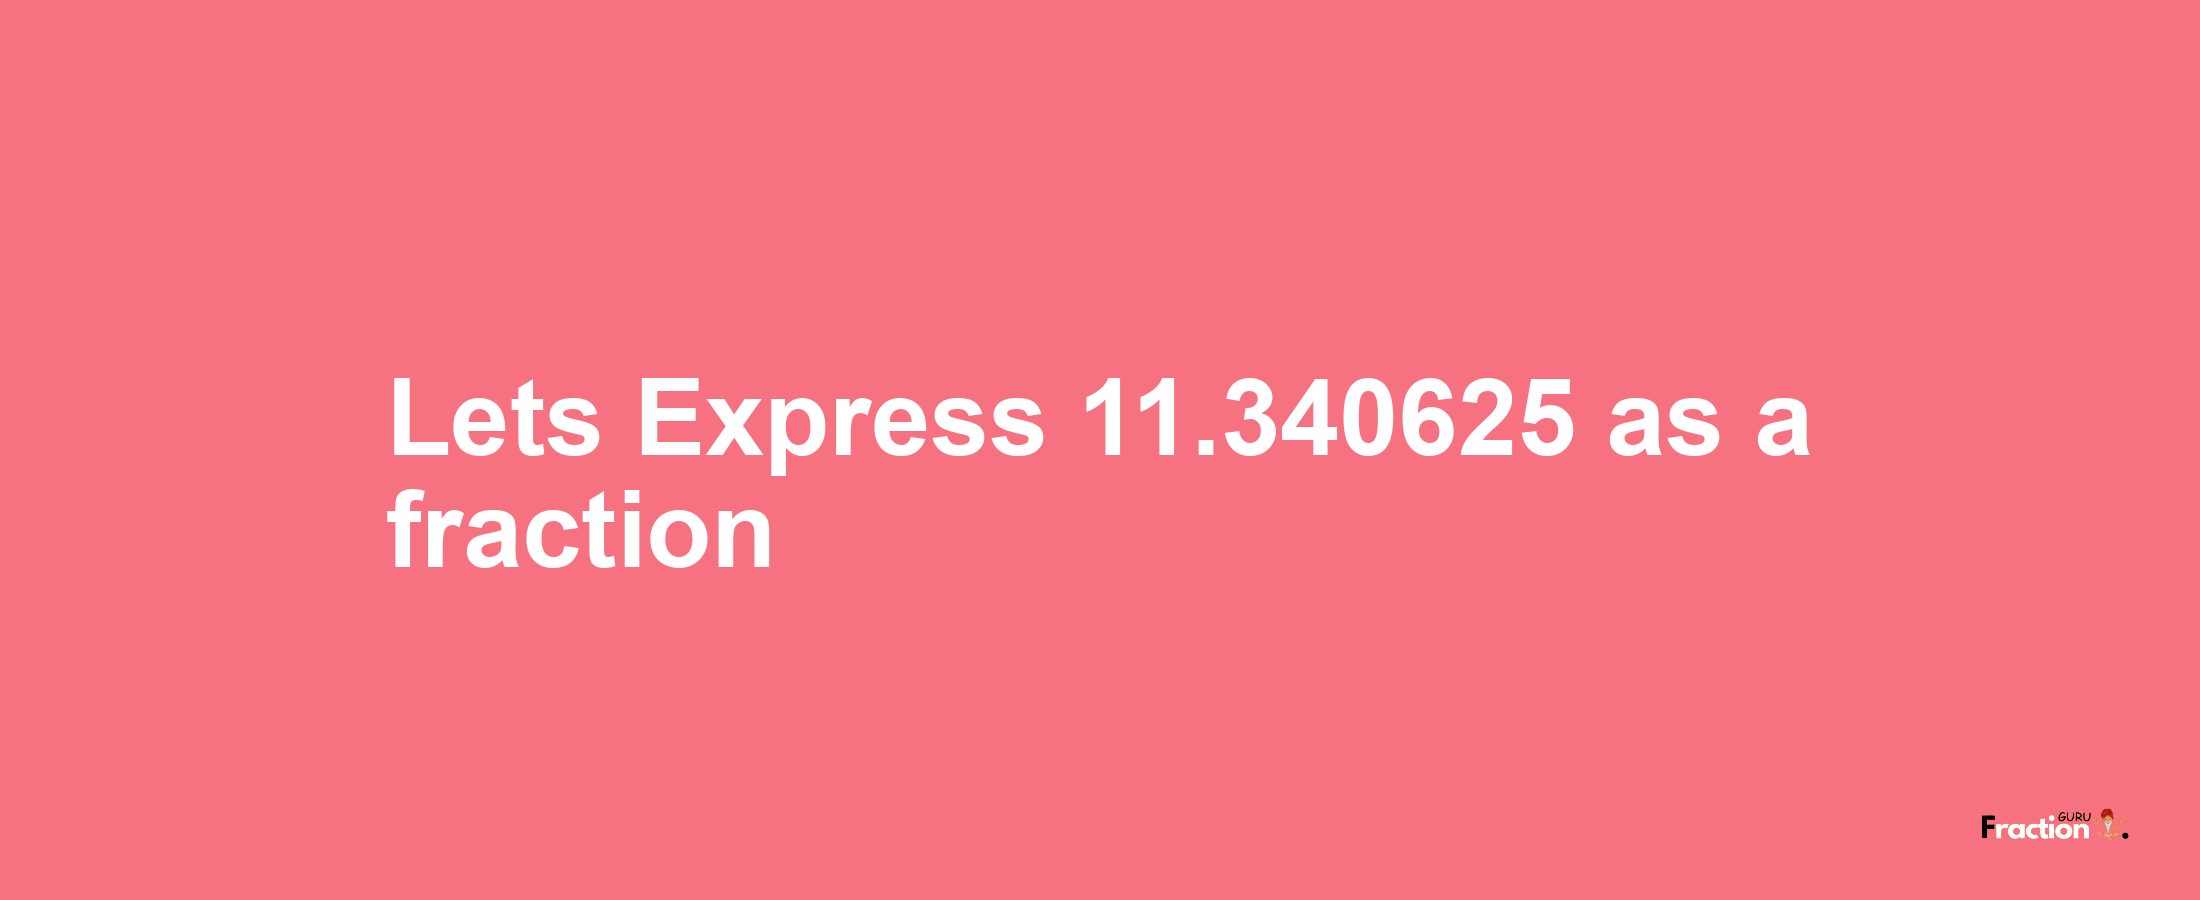 Lets Express 11.340625 as afraction